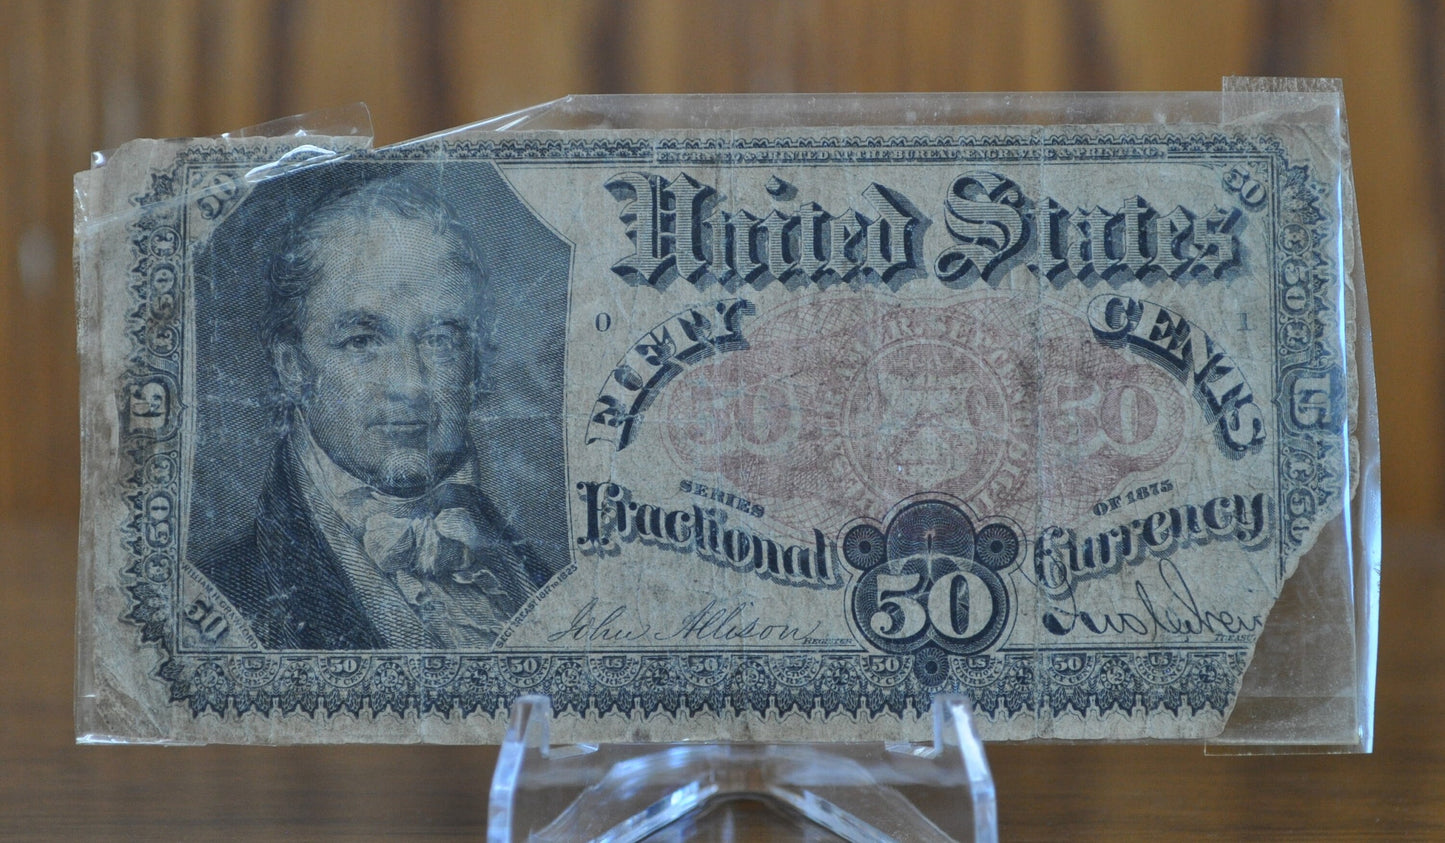 Fifth Issue 50 Cent Fractional Note 1875 - VF (Very Fine) Grade / Condition - 5th Issue Fifty Cent Note Fractional Note Fr1381, Authentic